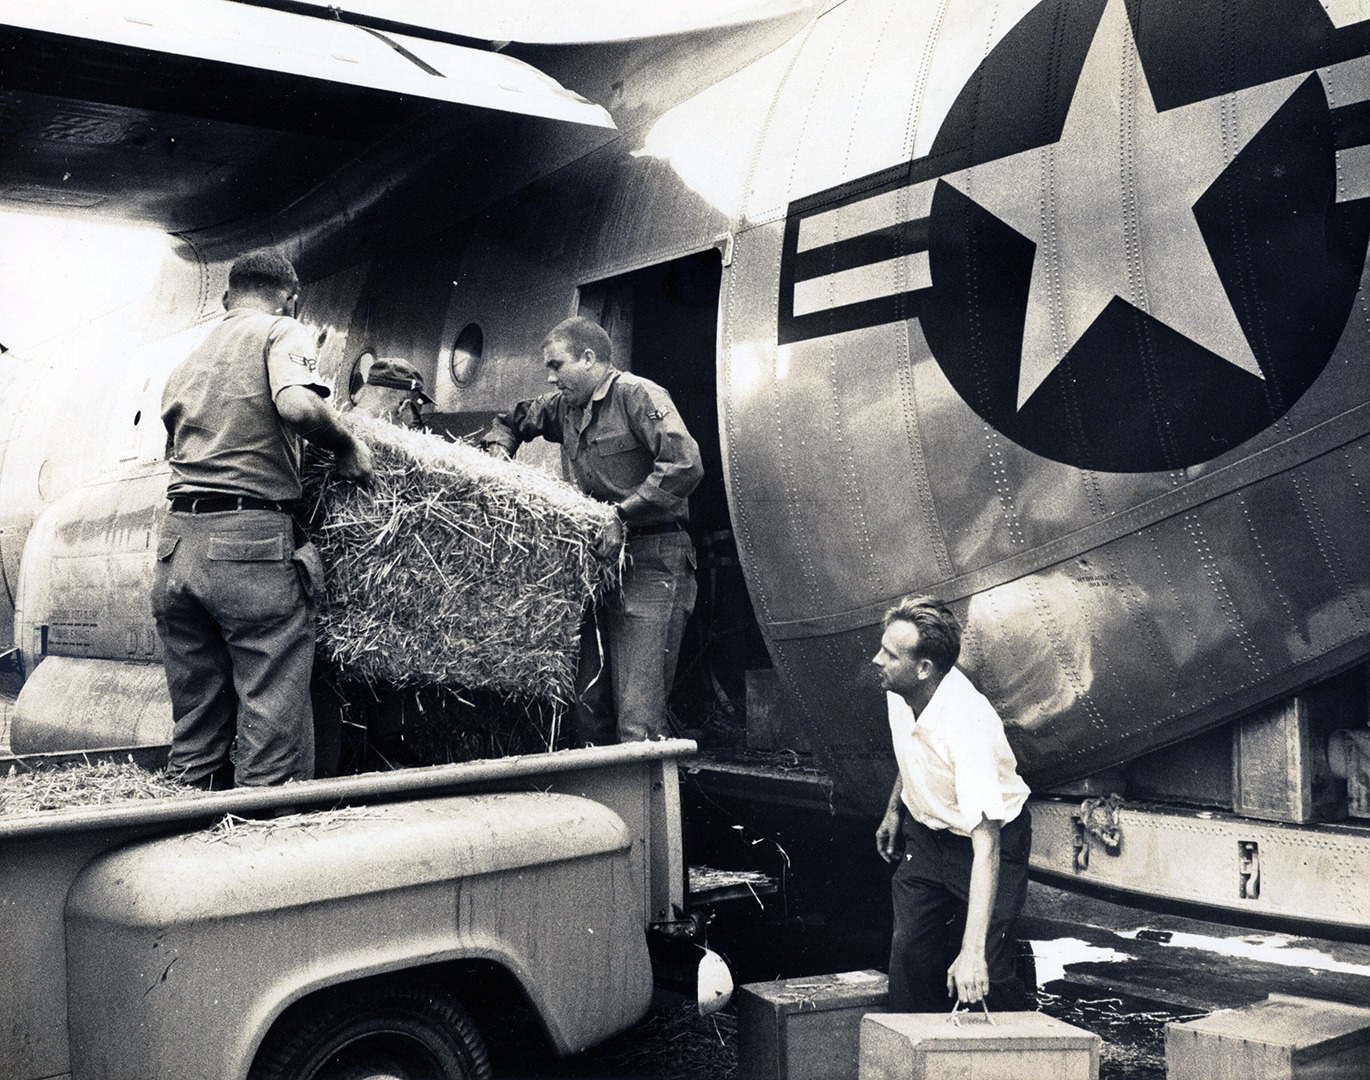 Paul Breese & Air force staff load hay into C130 Cargo plane  for Indian rhino shipment to National Zoo, 1963